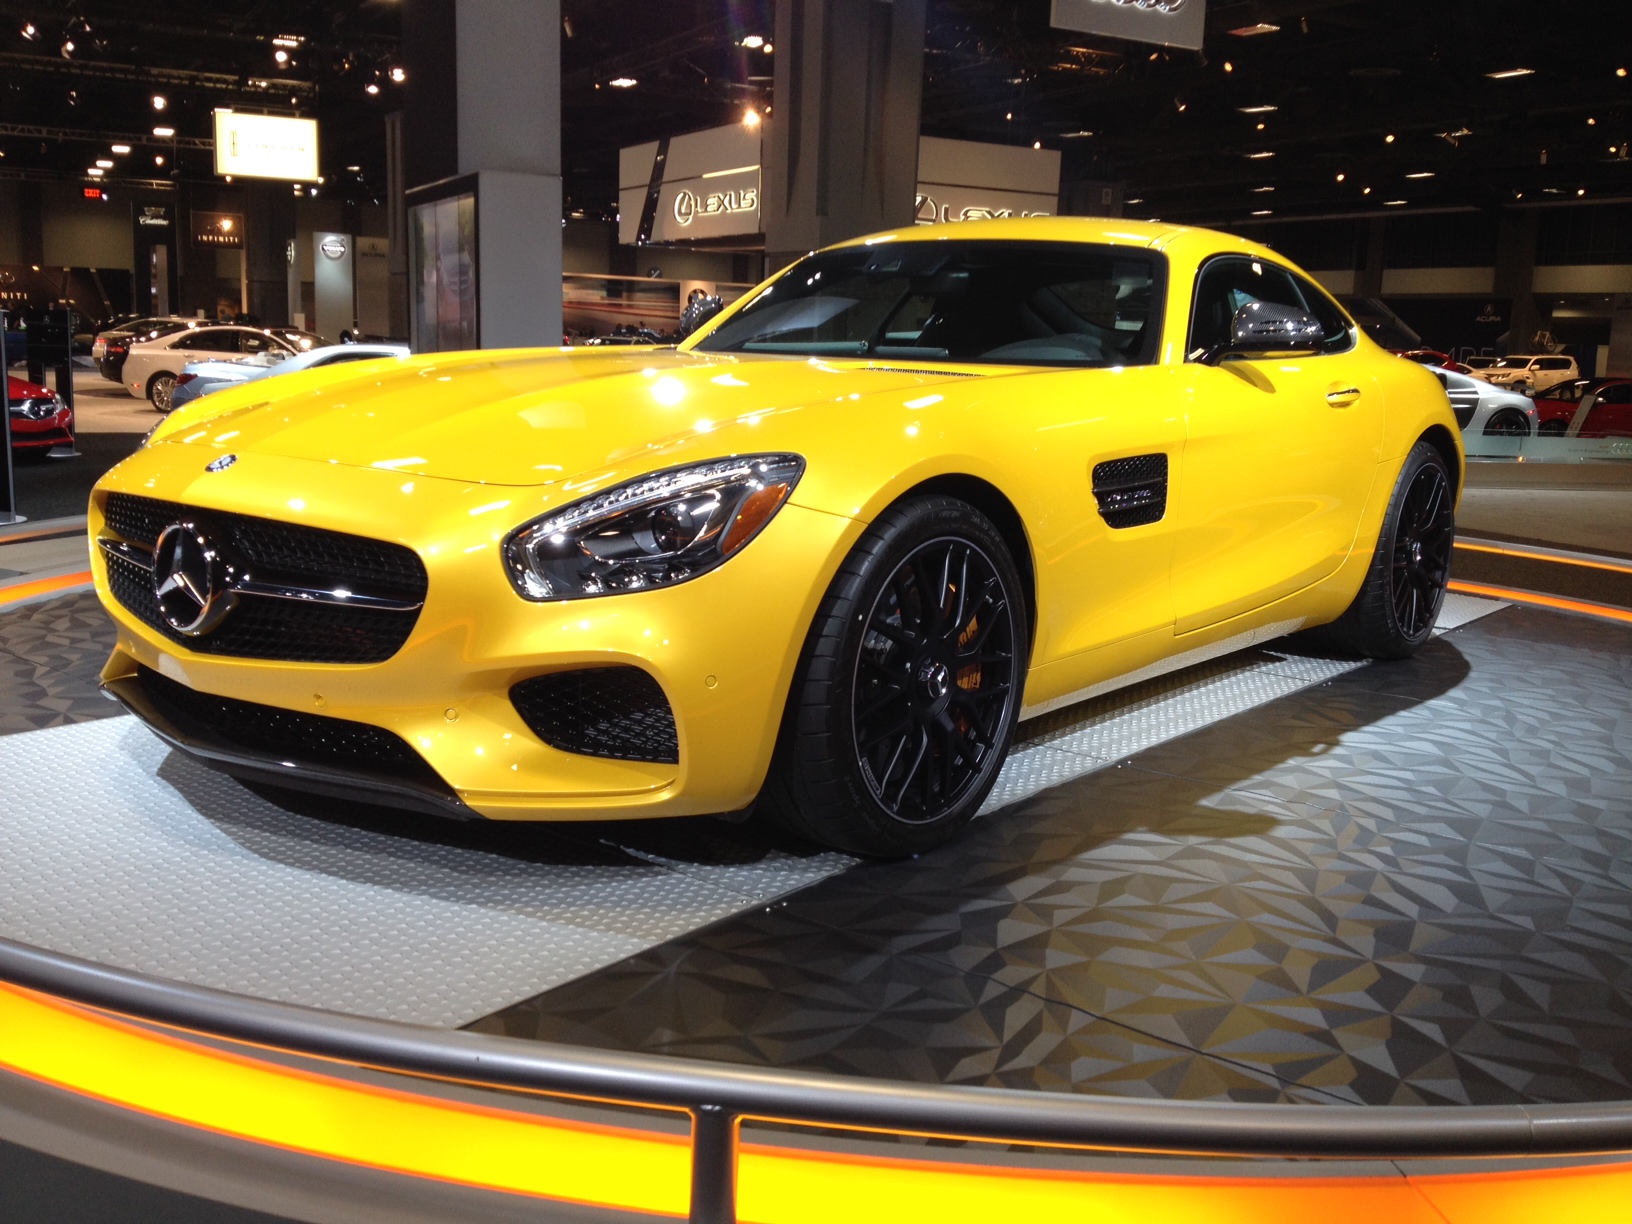 The 2016 Mercedes-AMG GT S was "raised on the racetrack," says Mercedes. Budget at least $130k if you'd like one.  (WTOP/John Aaron)